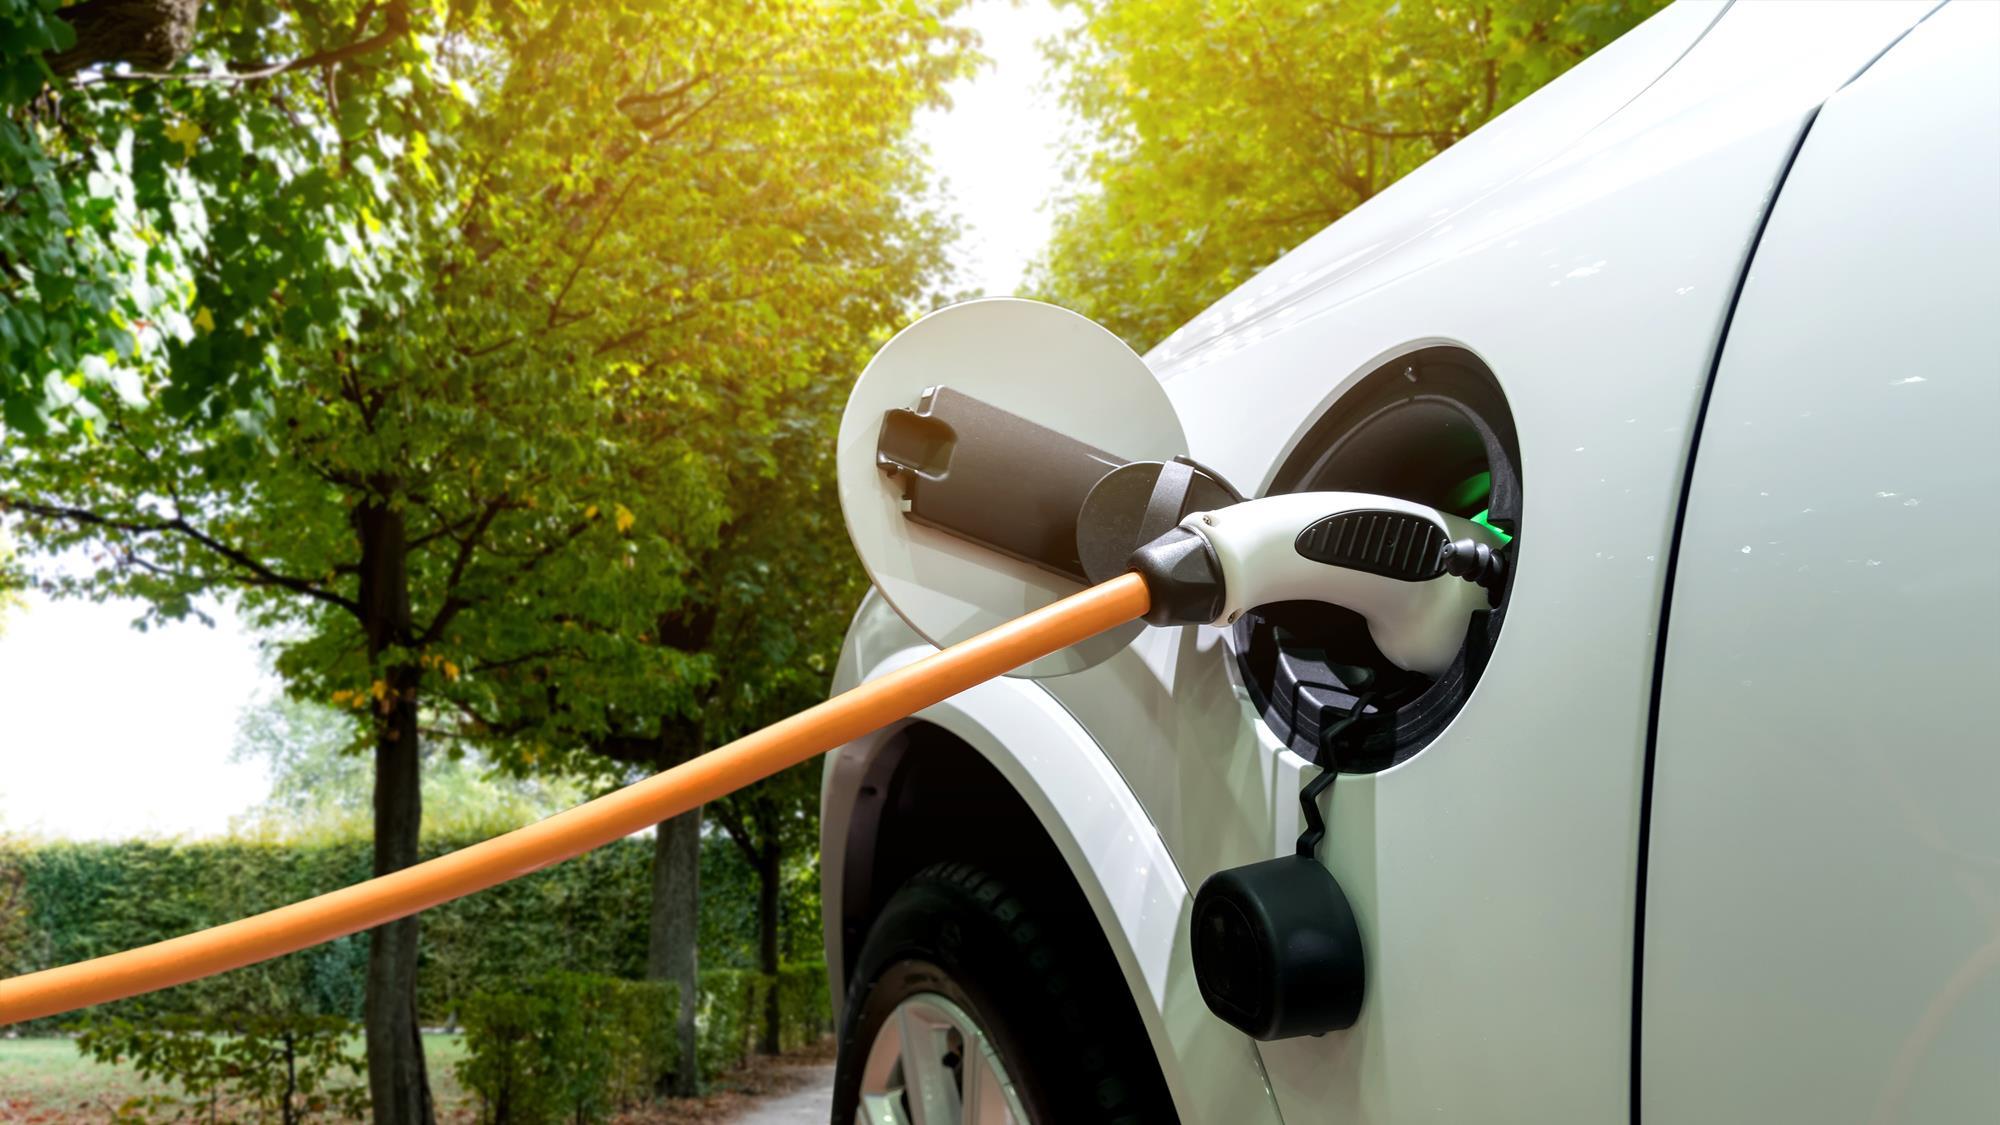 A photo depicting an electric car being charged.